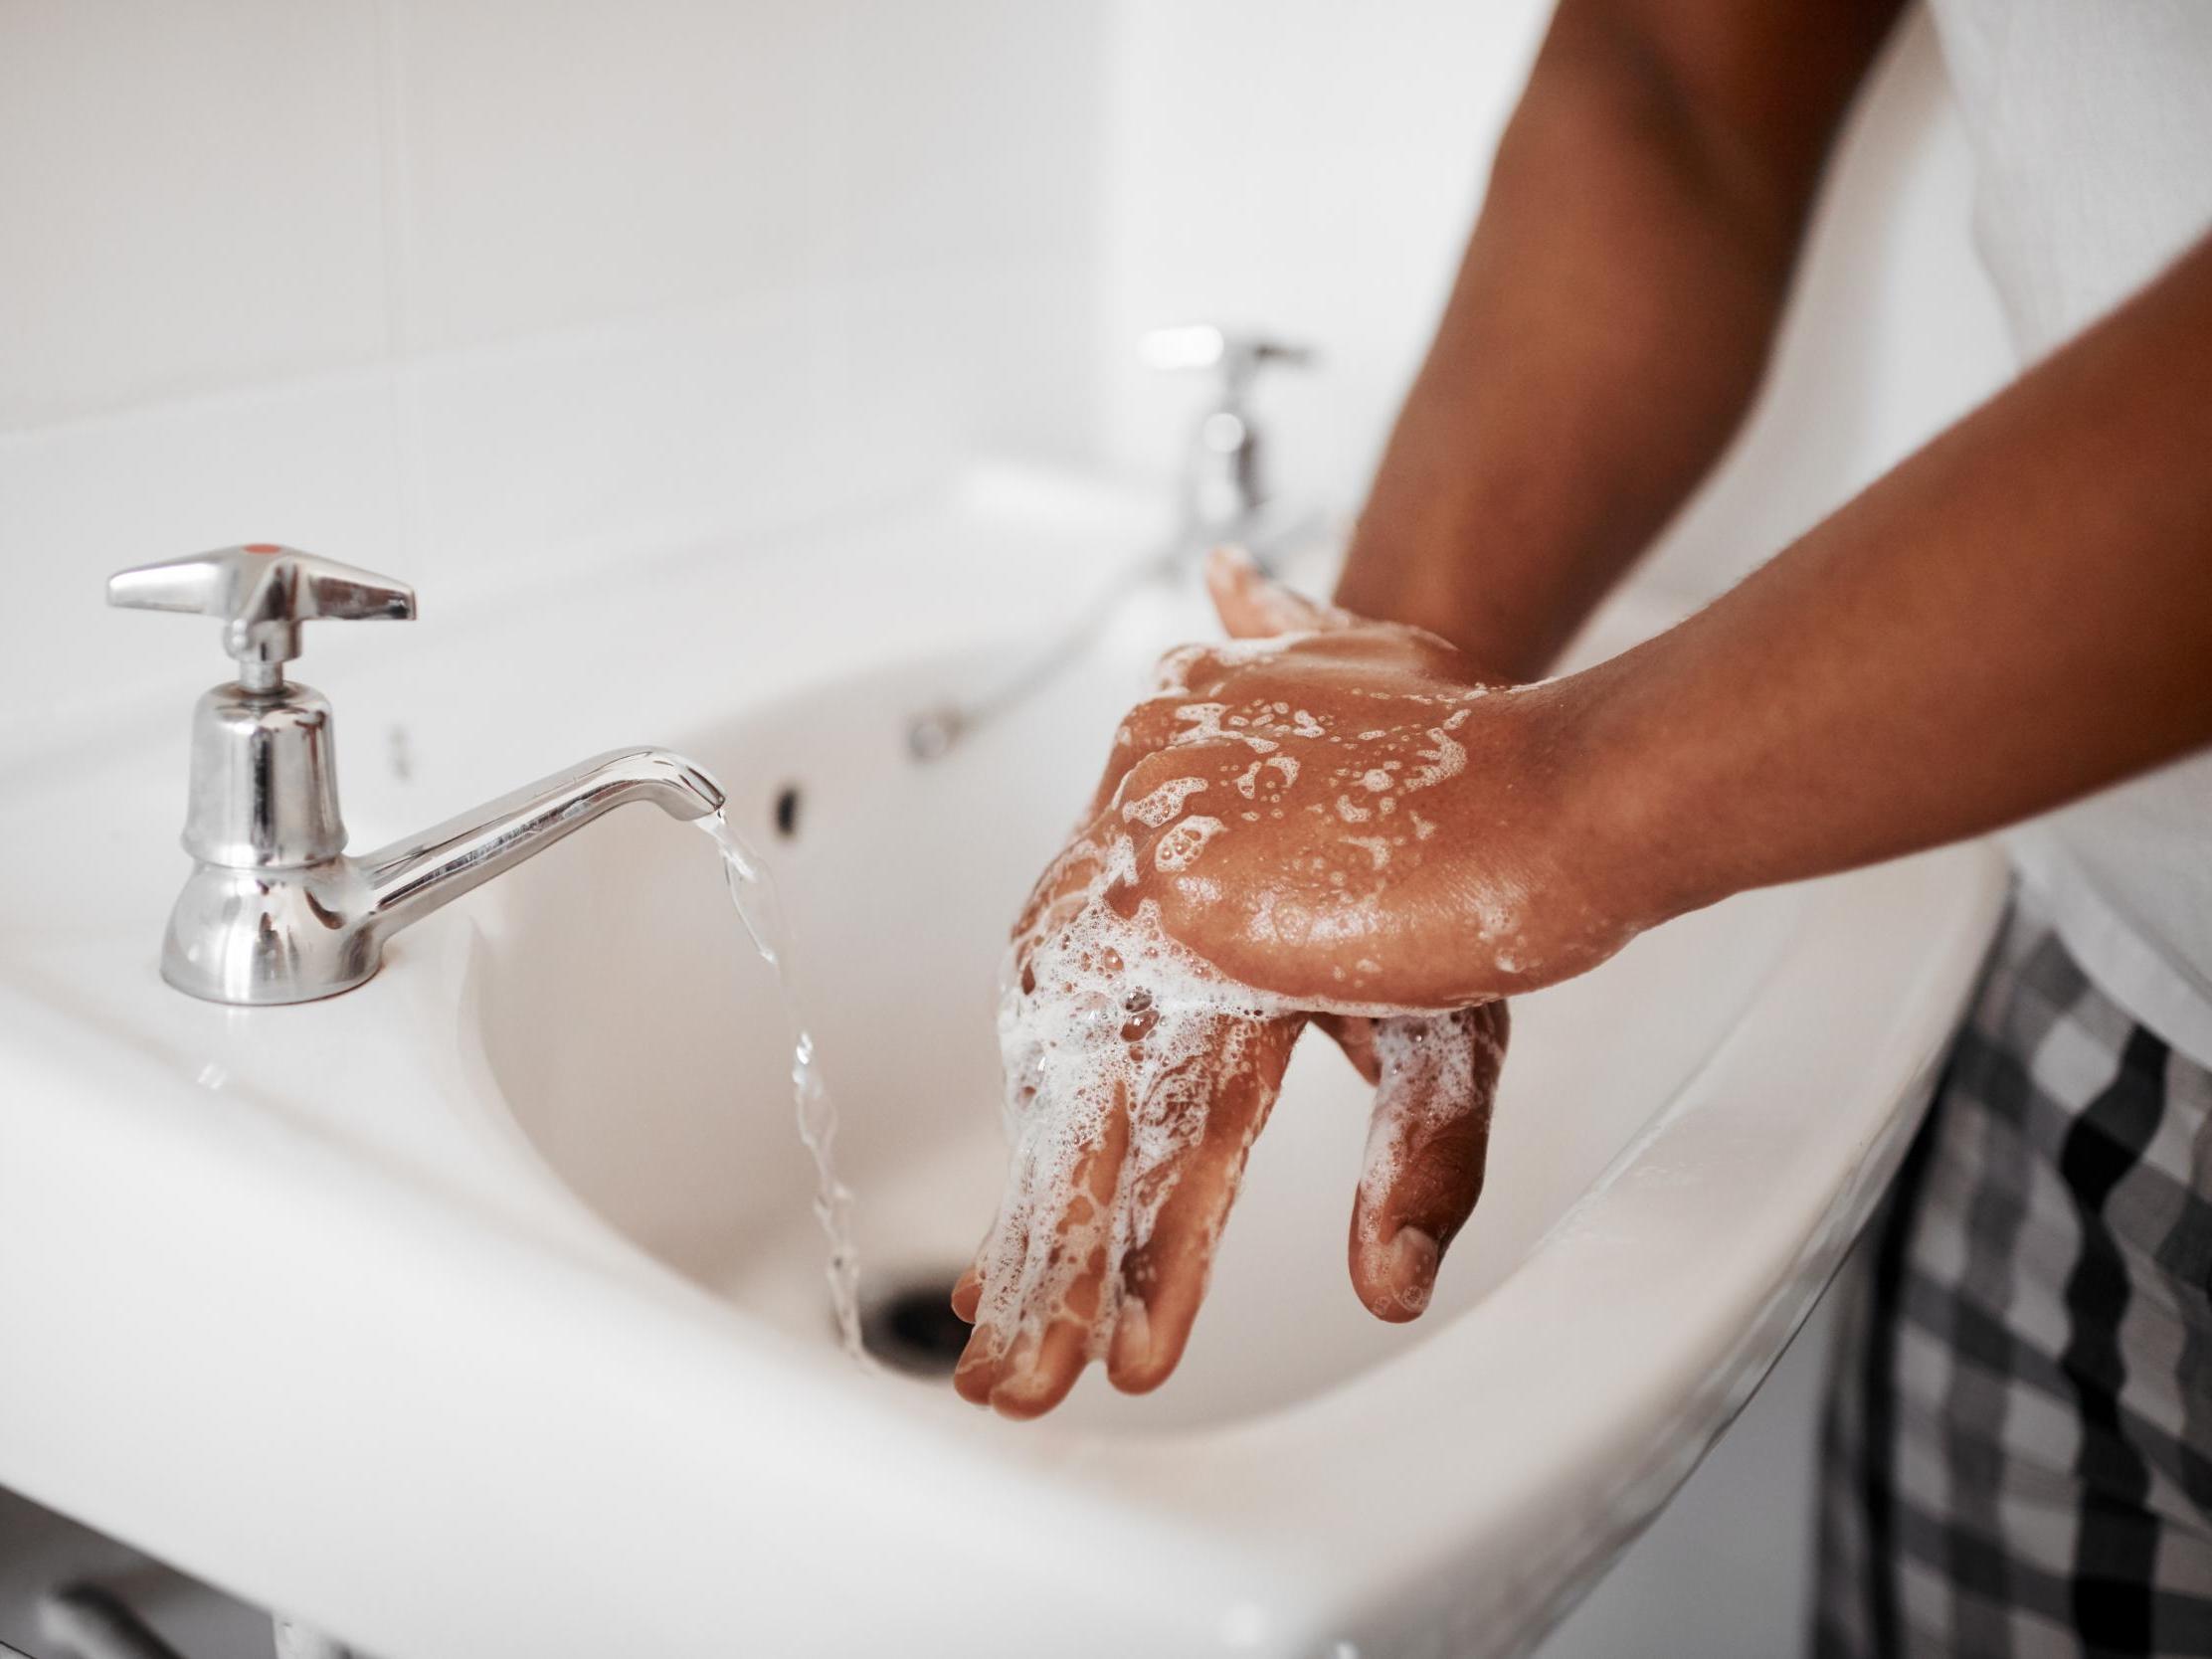 Personal hygiene remains a key way for people around the world to combat the virus